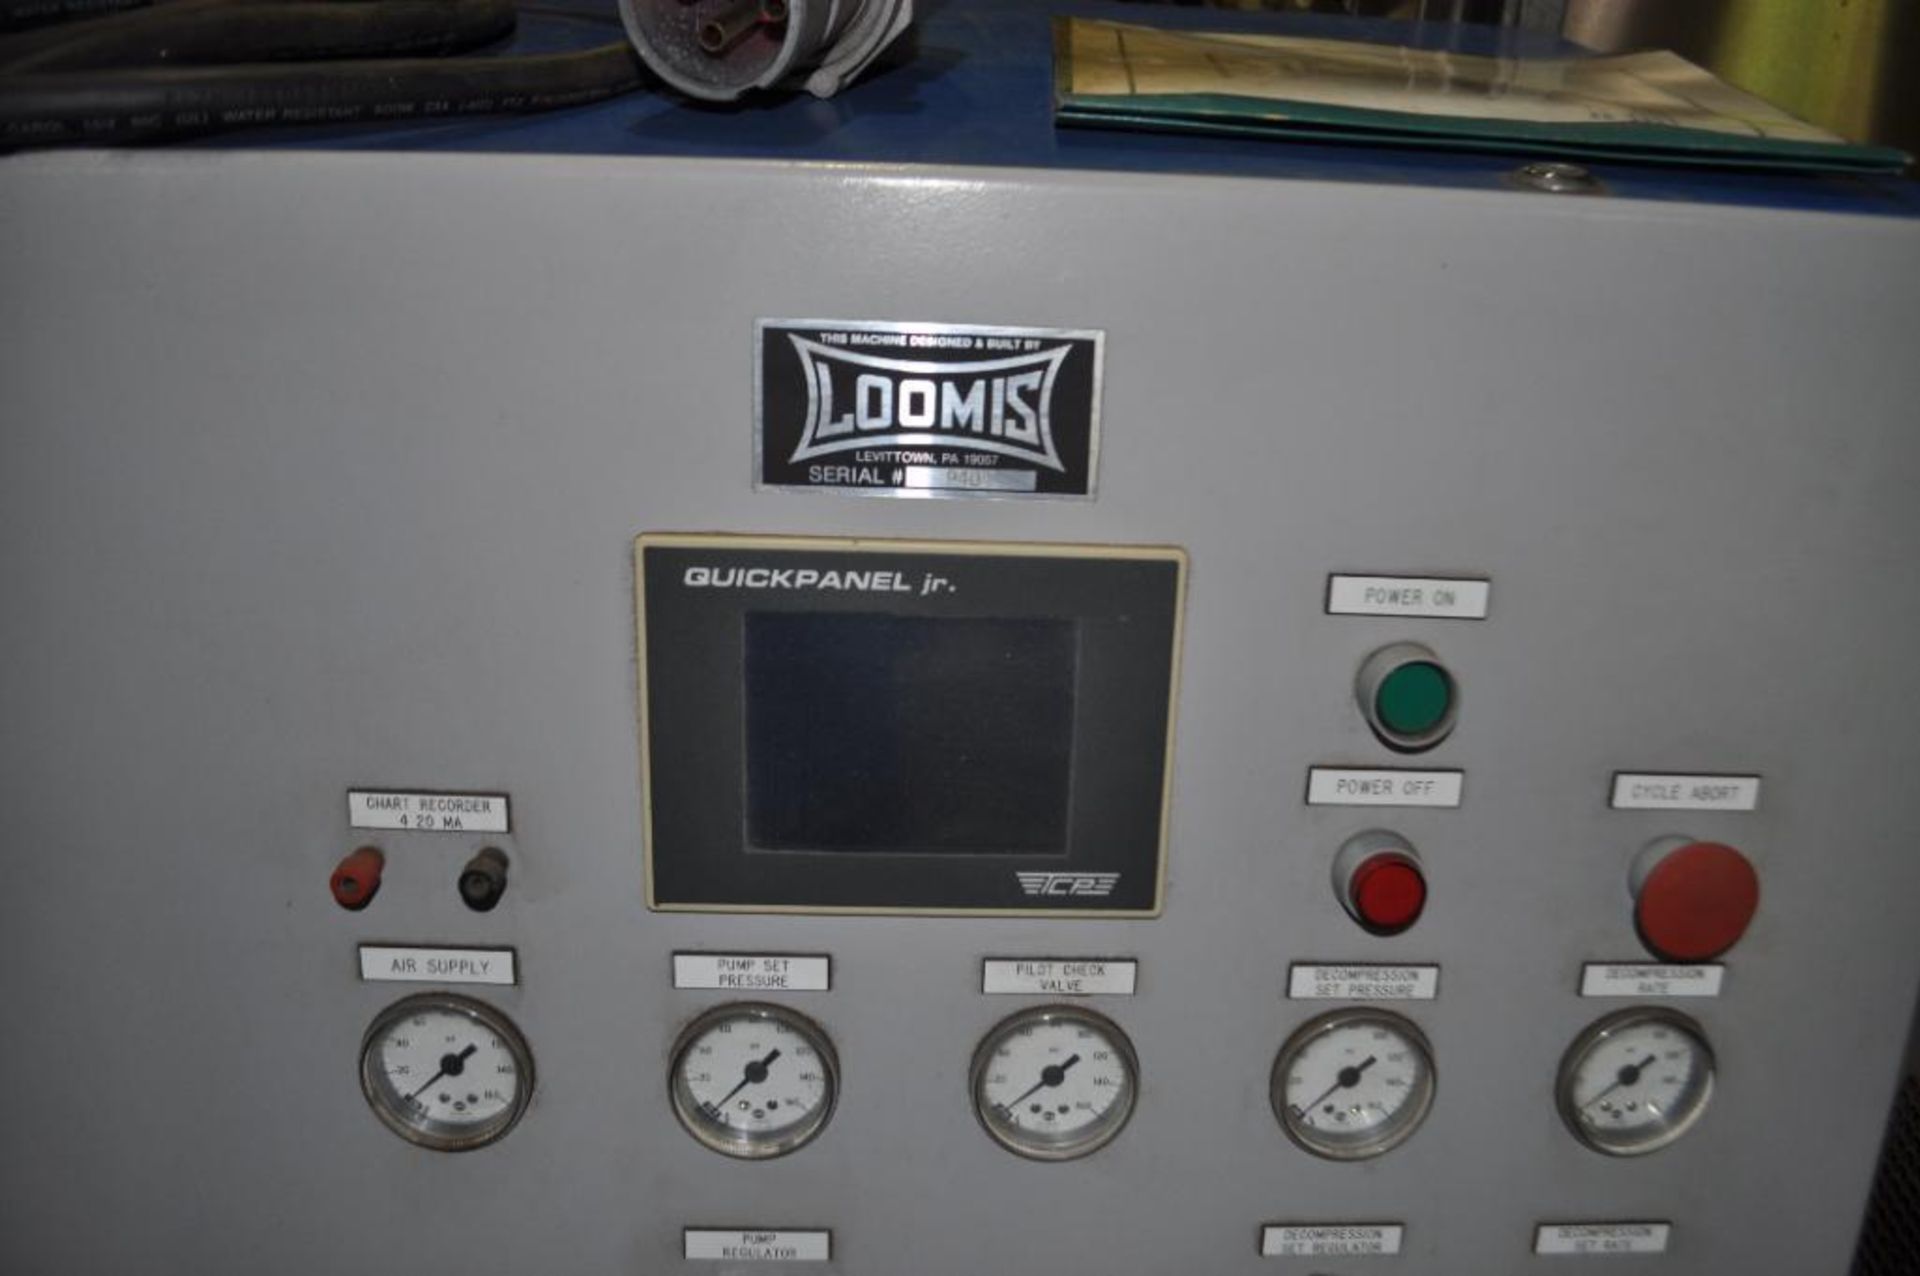 LOOMIS ISO-STATIC MOLDER PRESS, 45,000 PSI, 86 CUBIC INCH CAPACITY - Image 2 of 4